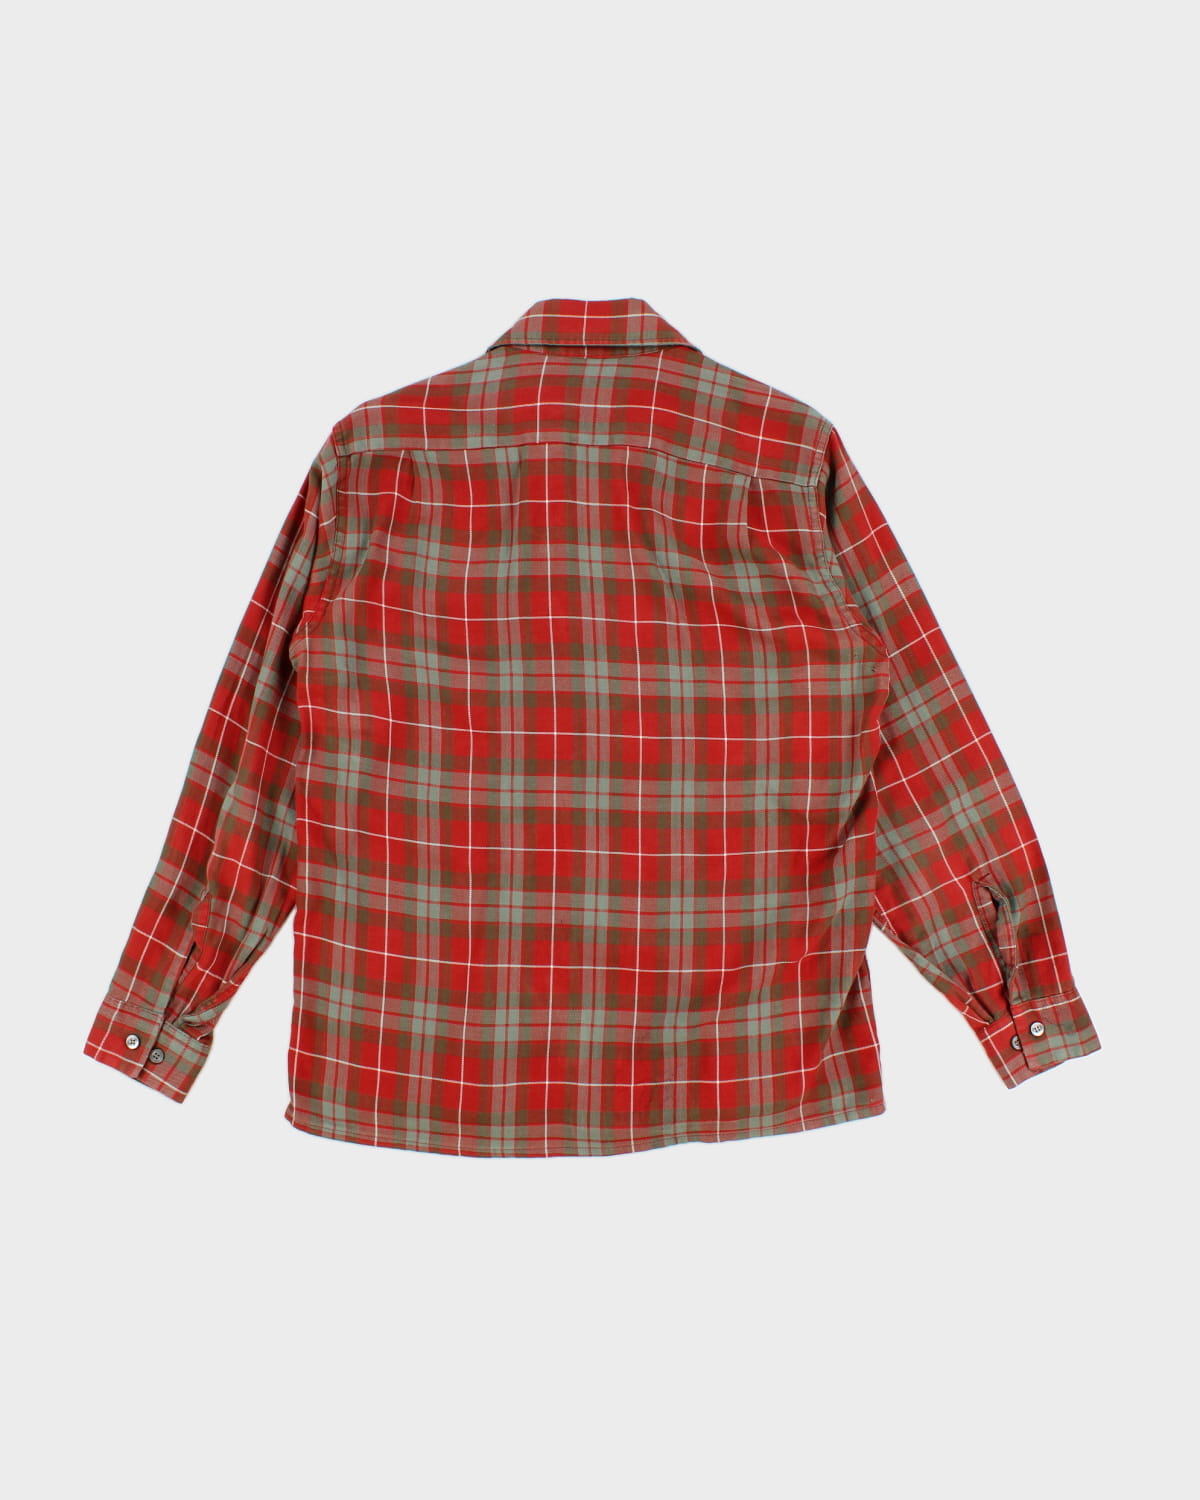 Vintage 60s Red Check Shirt - M